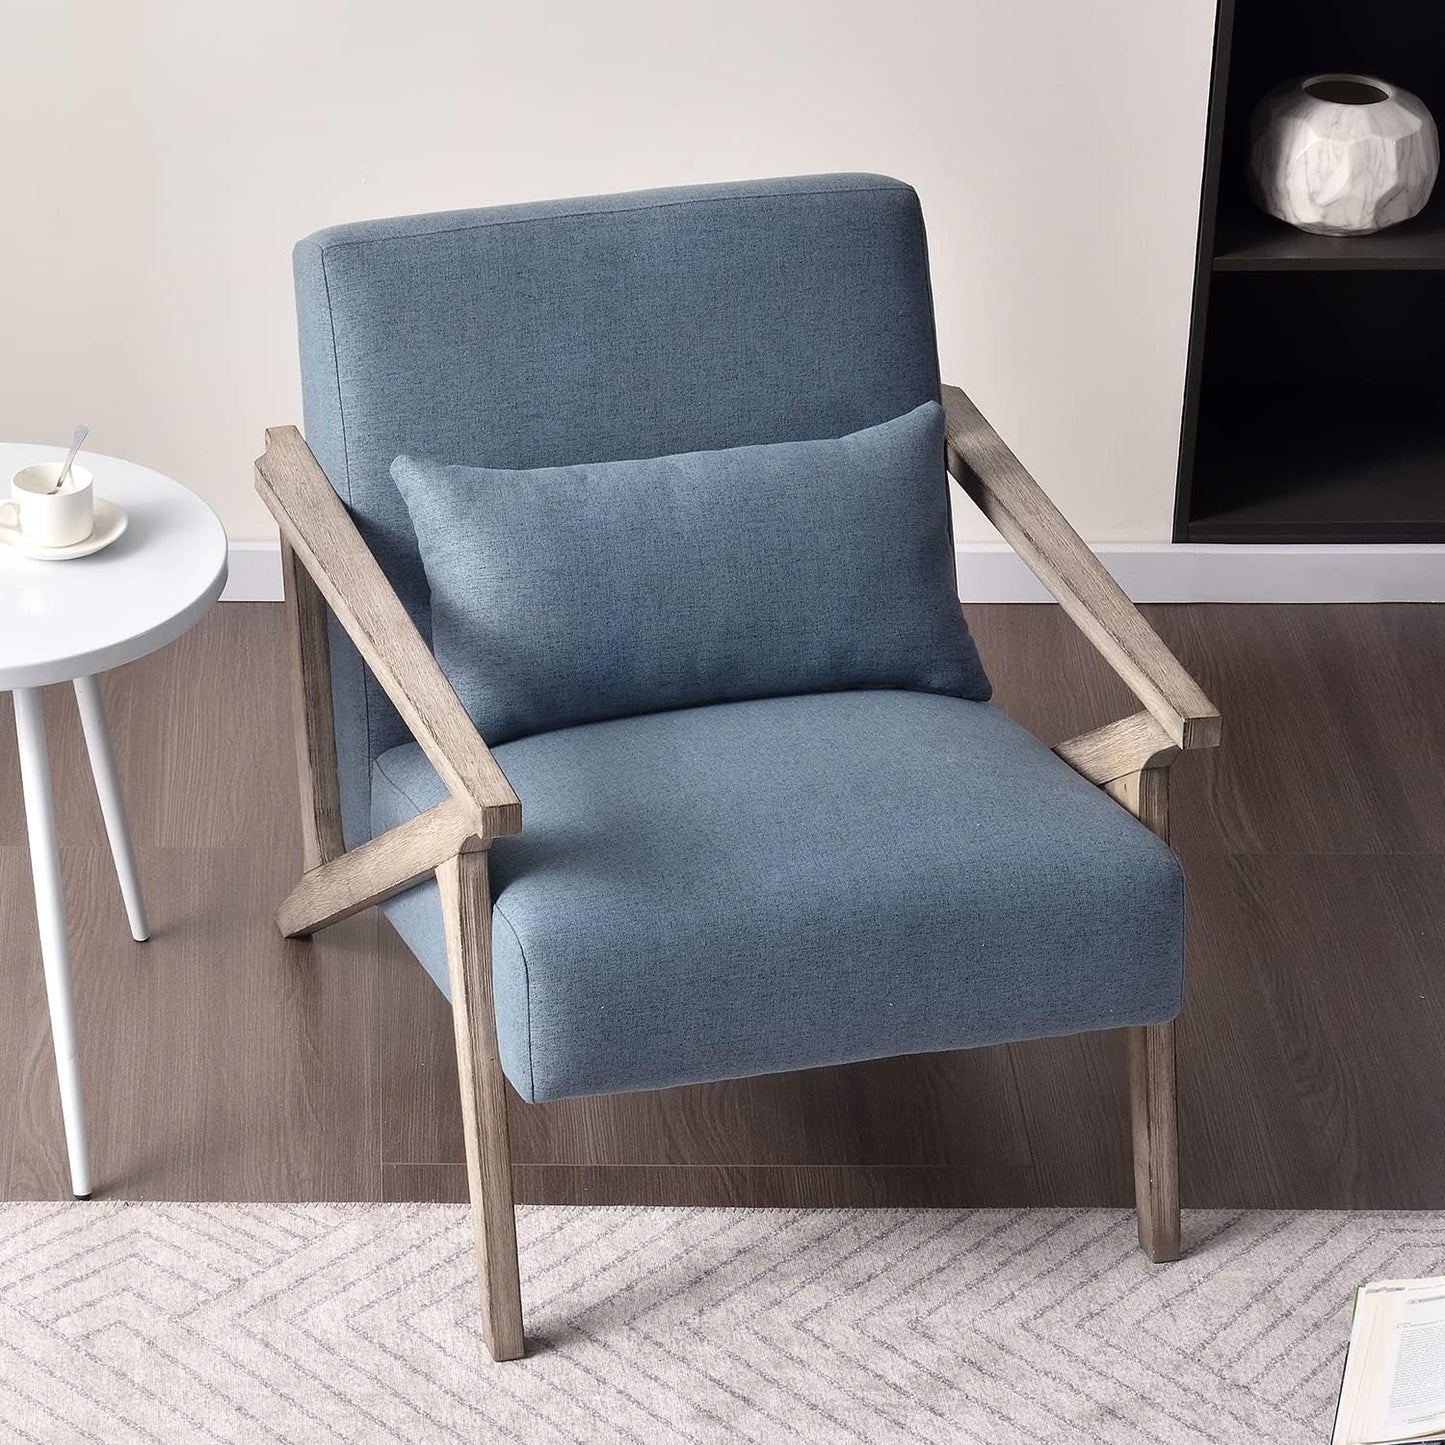 AvaMalis Mid Century Modern Chair with Wood Frame Upholstered Armchair with Waist Cushion, Accent Chair, Blue